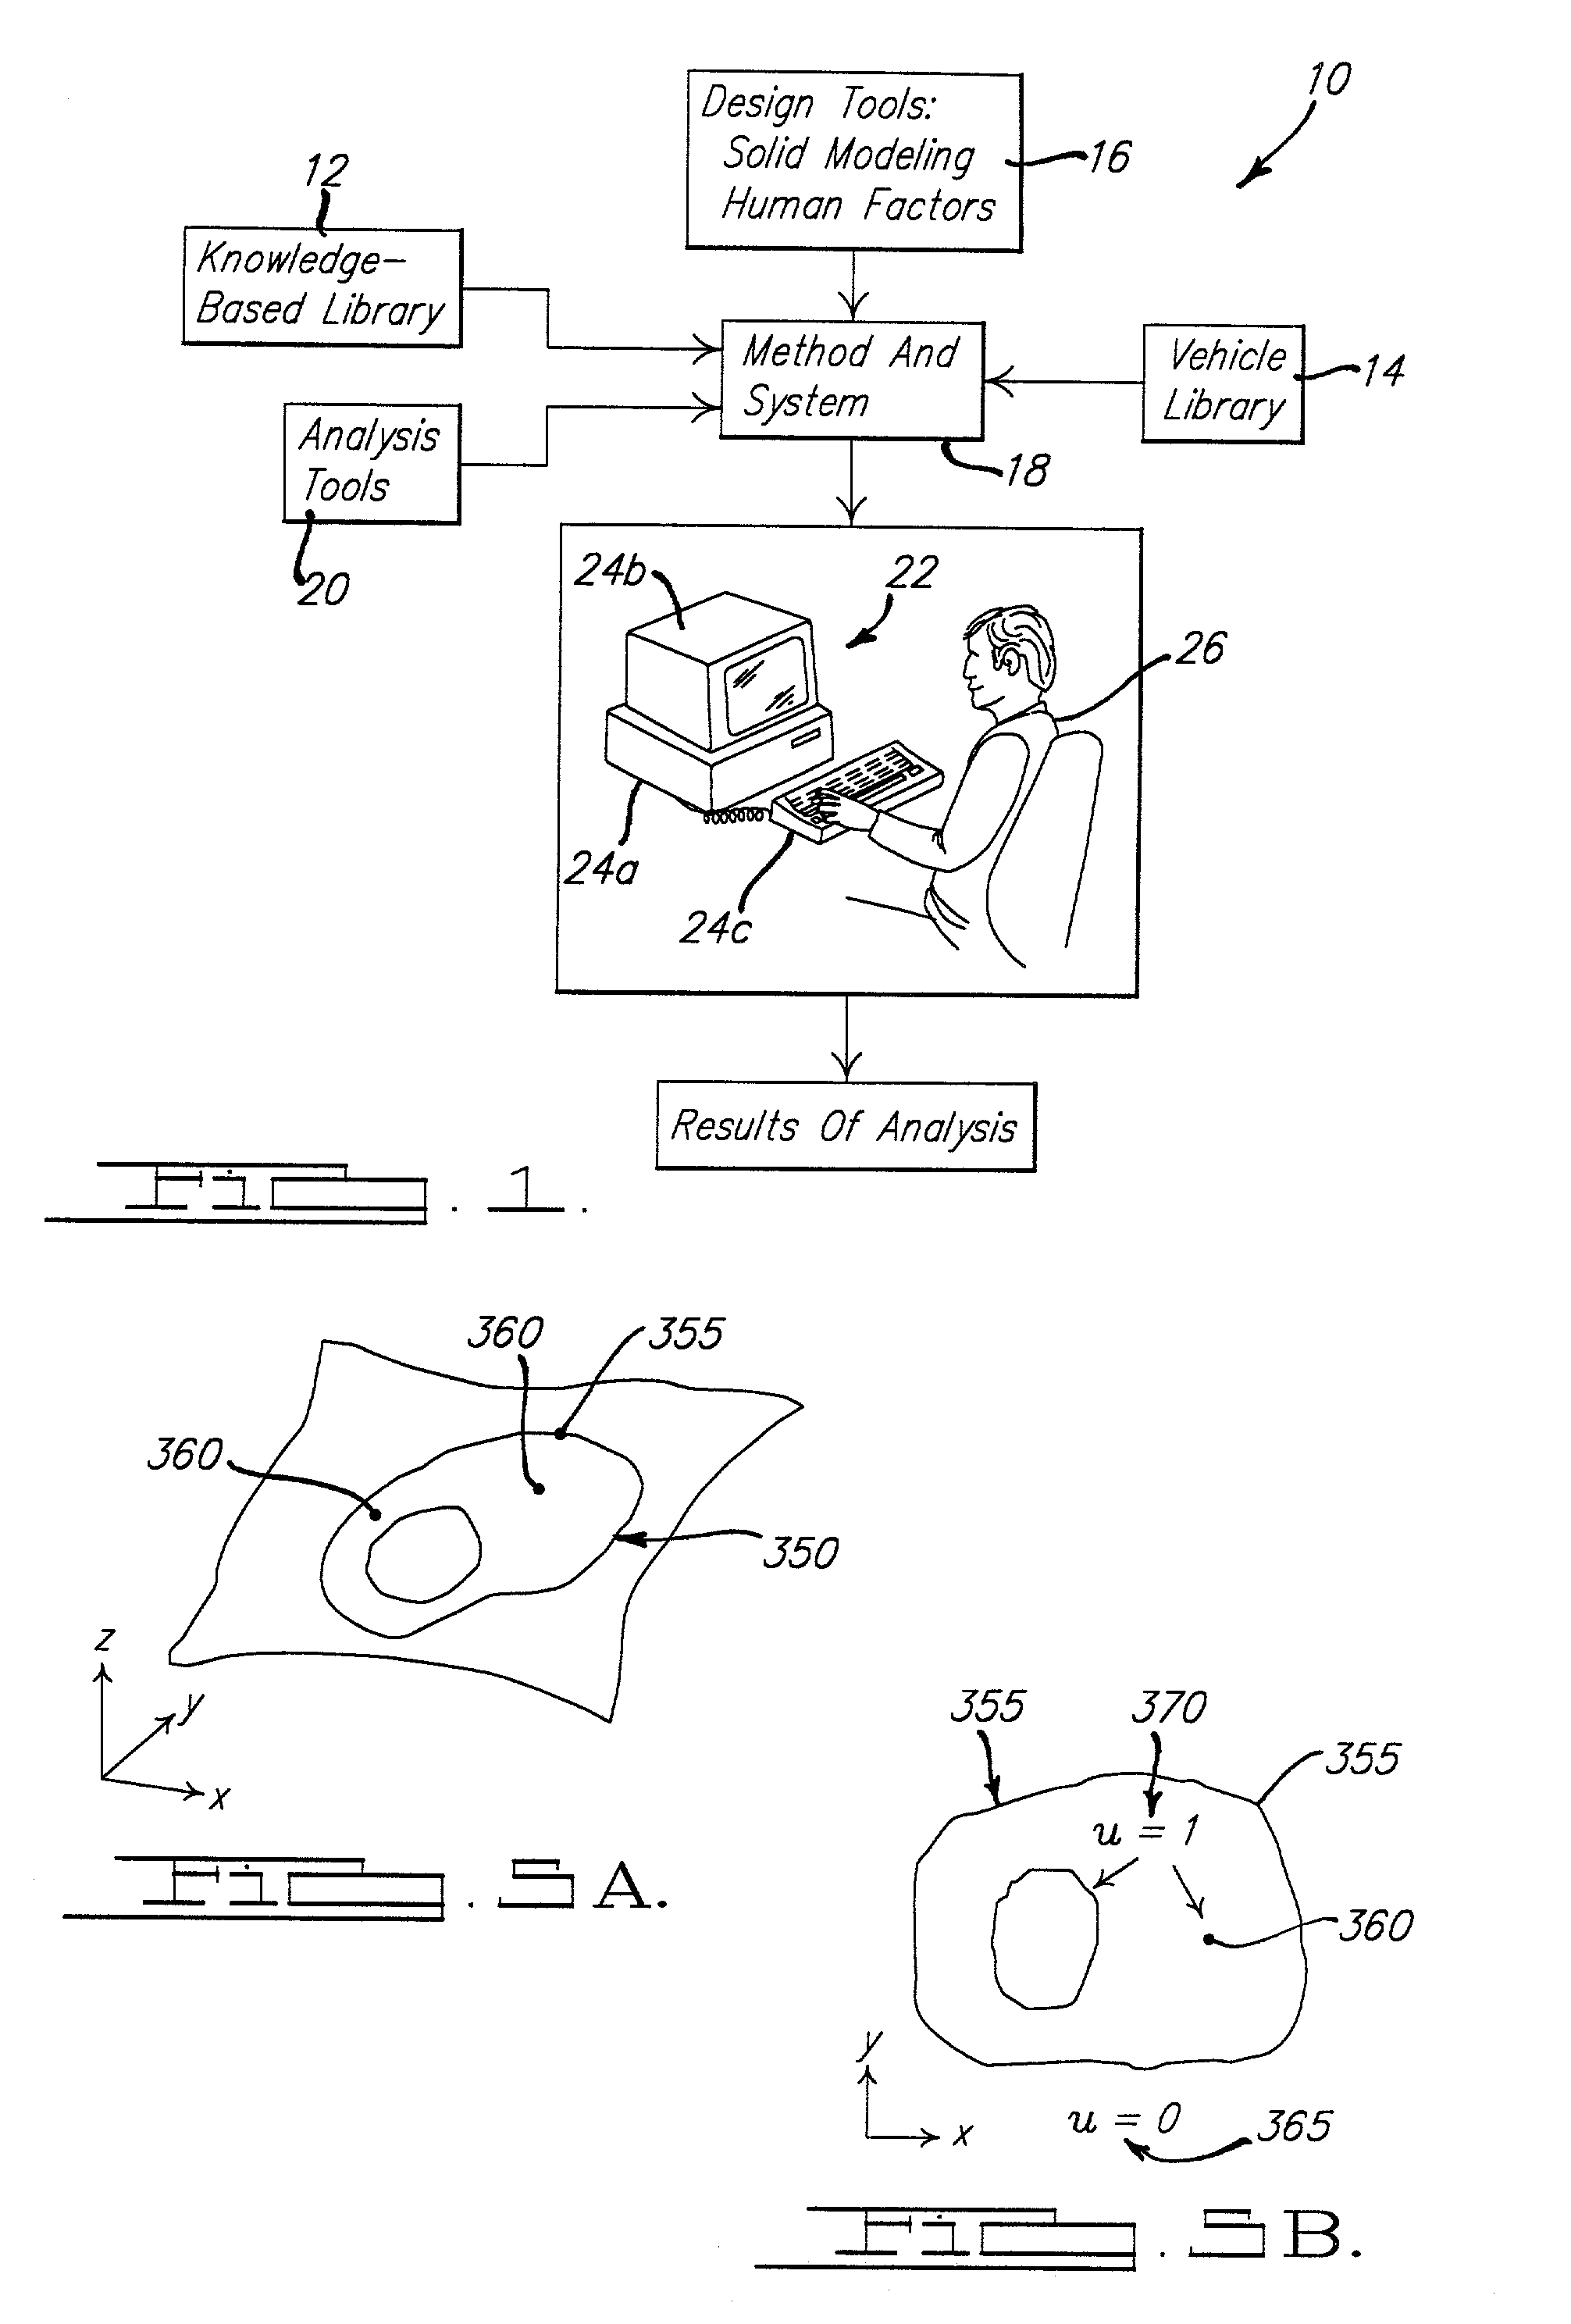 System and method of direct mesh manipulation